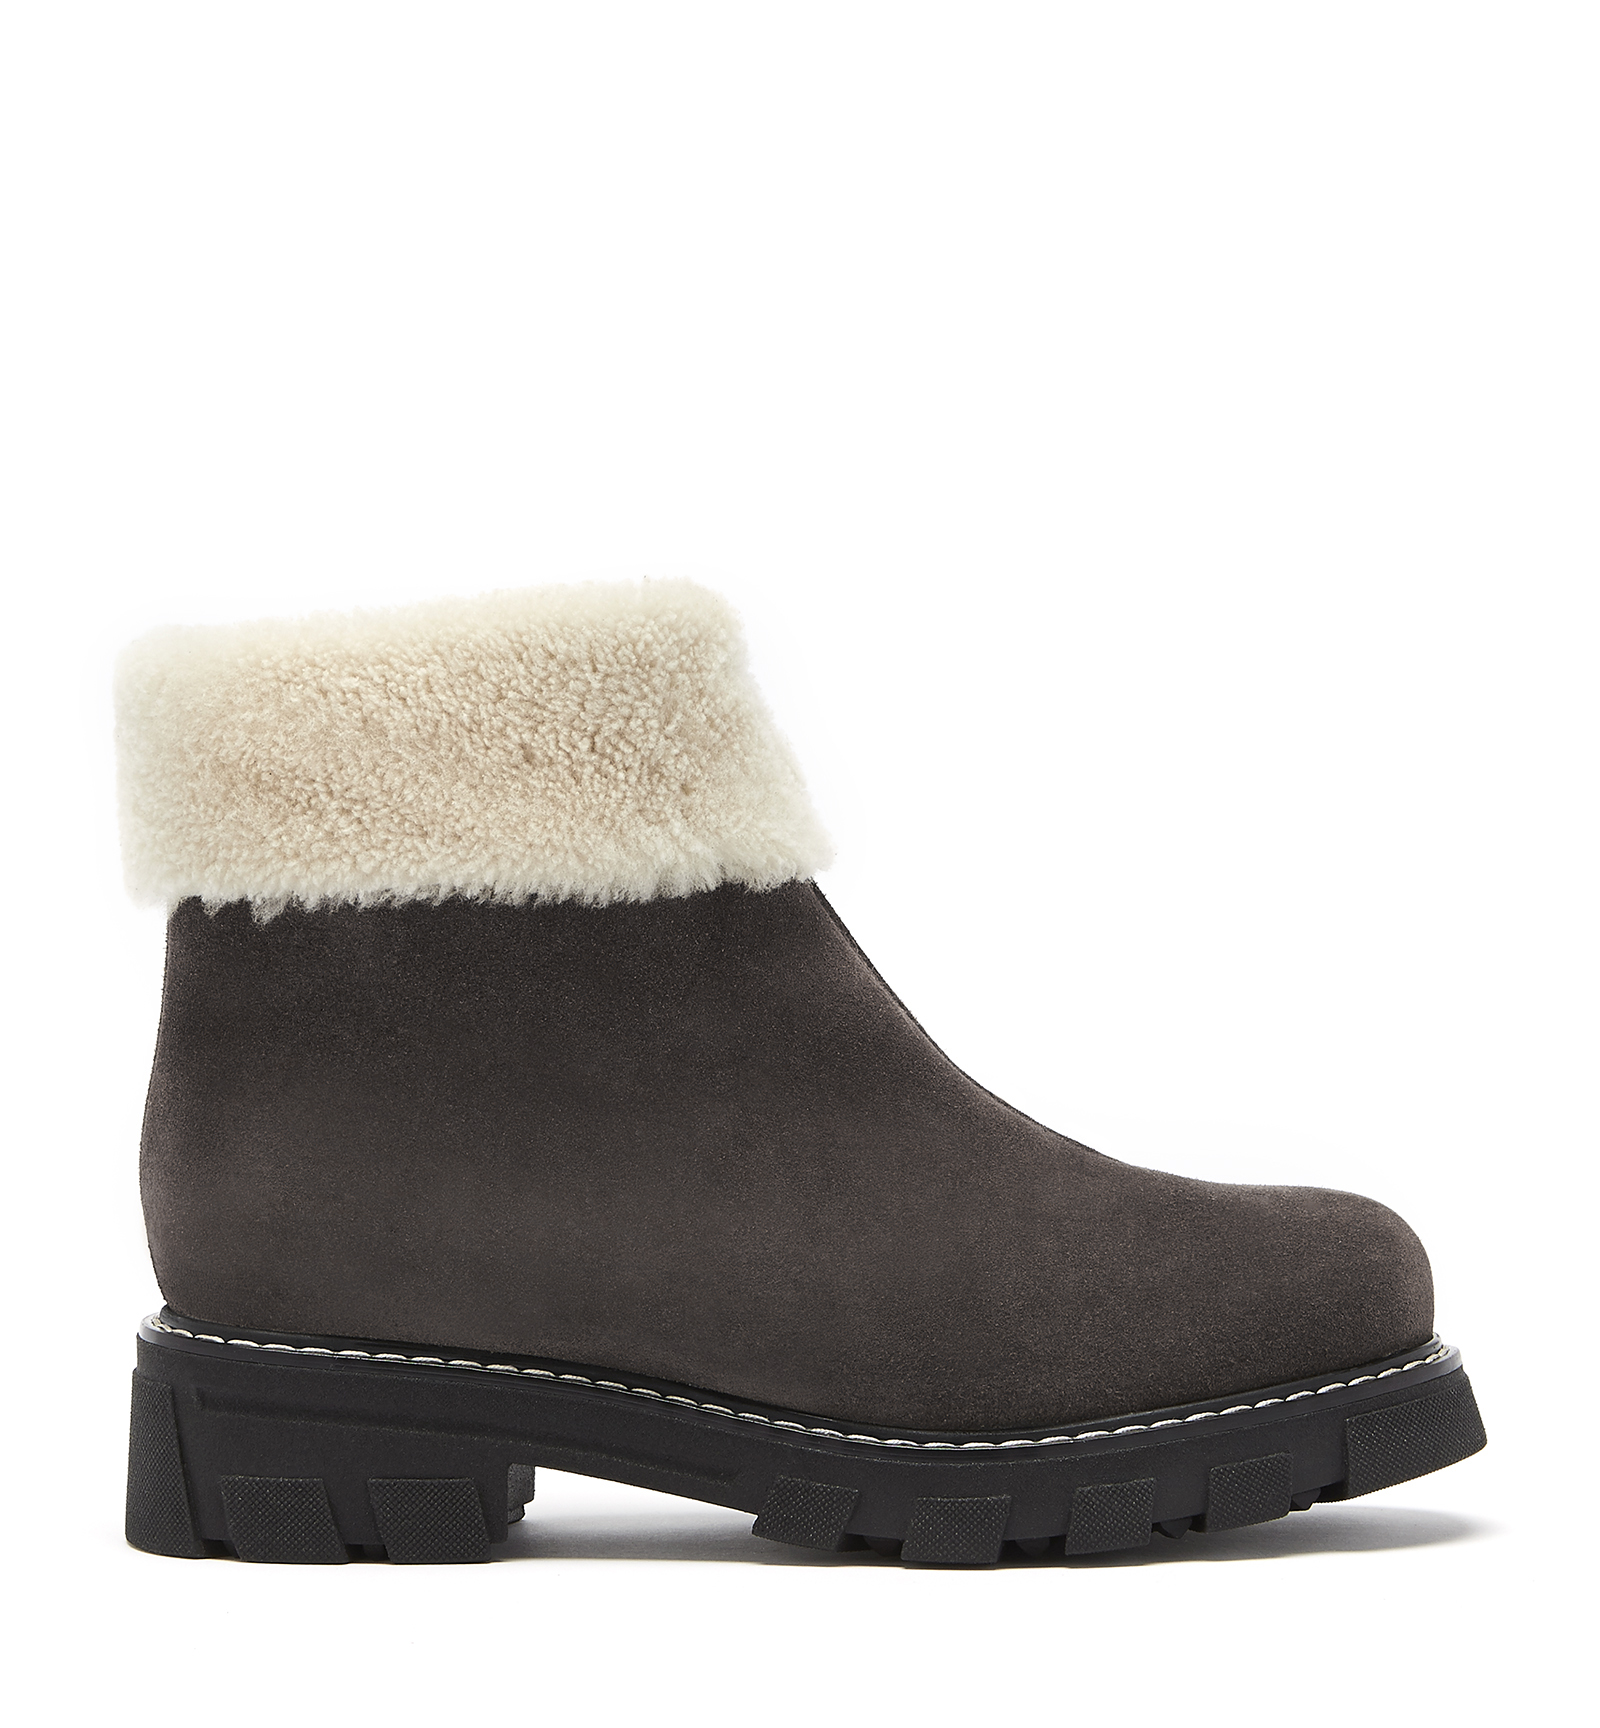 La Canadienne Abba X You Shearling Lined Bootie In London